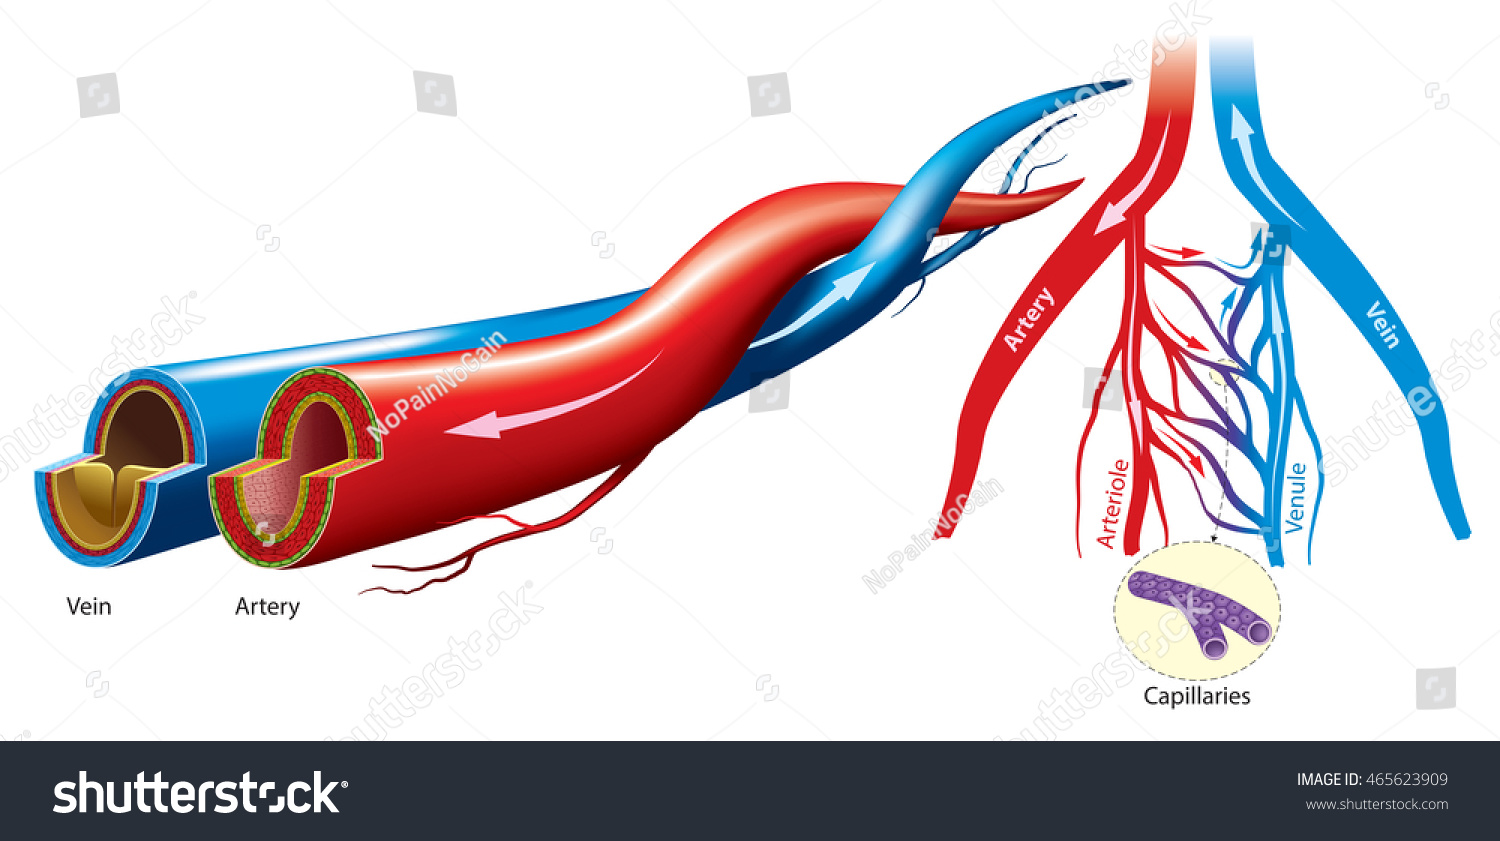 Artery And Vein Structure Stock Vector 465623909 : Shutterstock